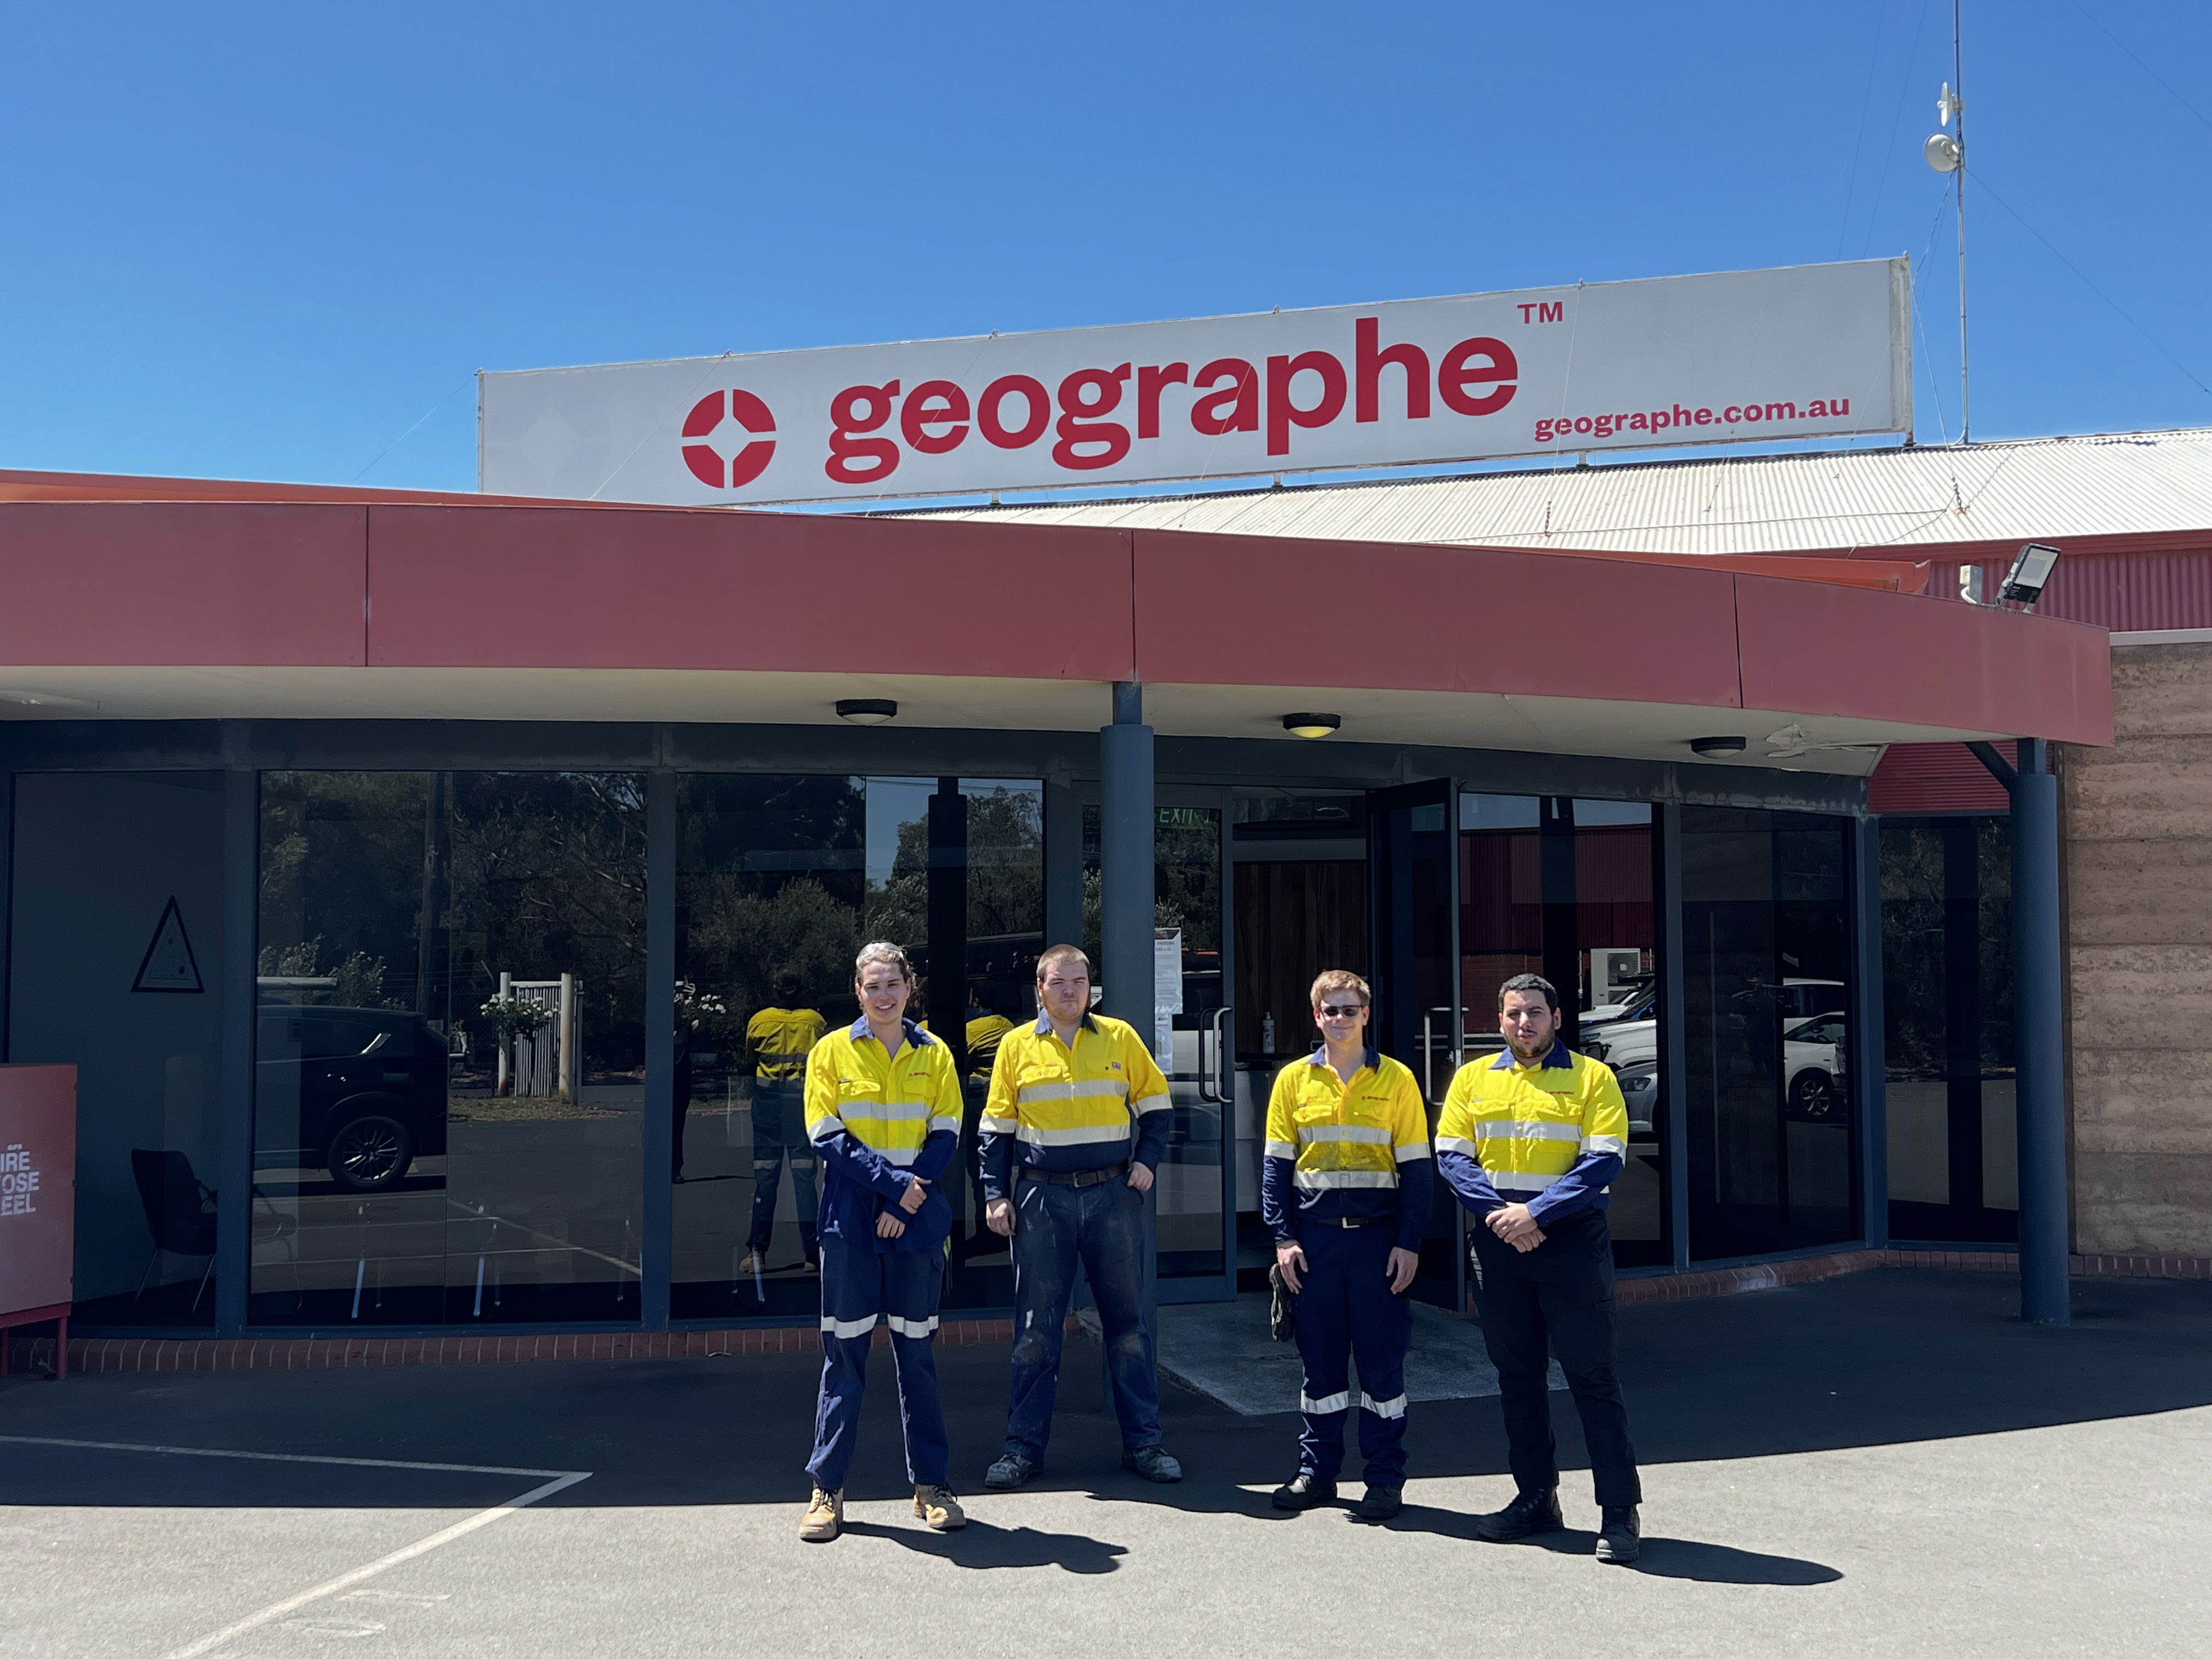 How to Apply for an Apprenticeship at Geographe